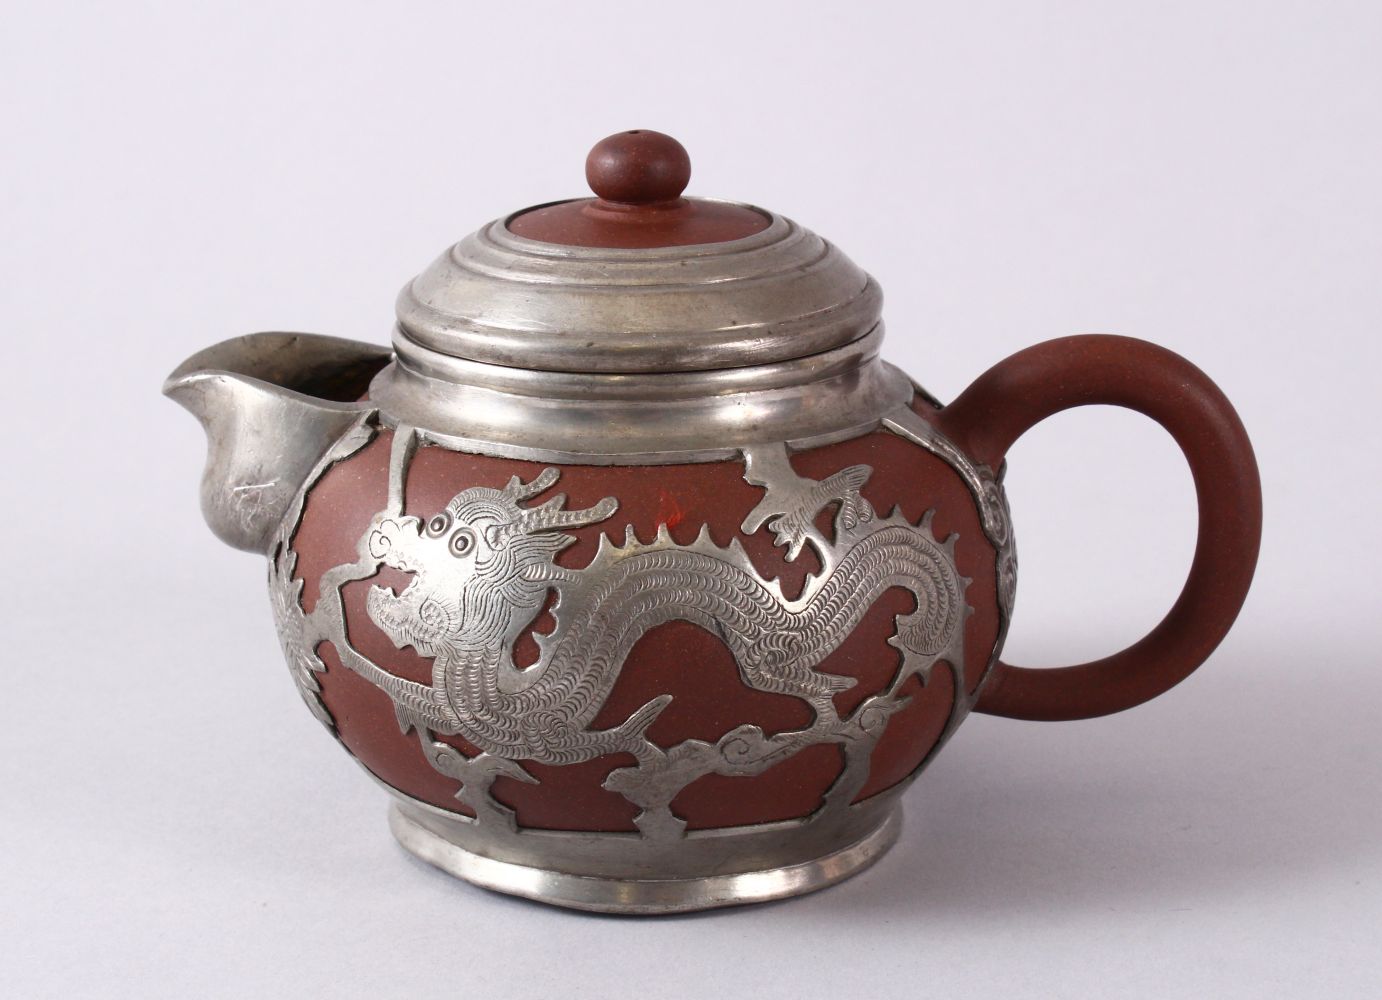 A CHINESE YIXING CLAY & WHITE METAL DRAGON TEAPOT, The body of the teapot encapsulated with a carved